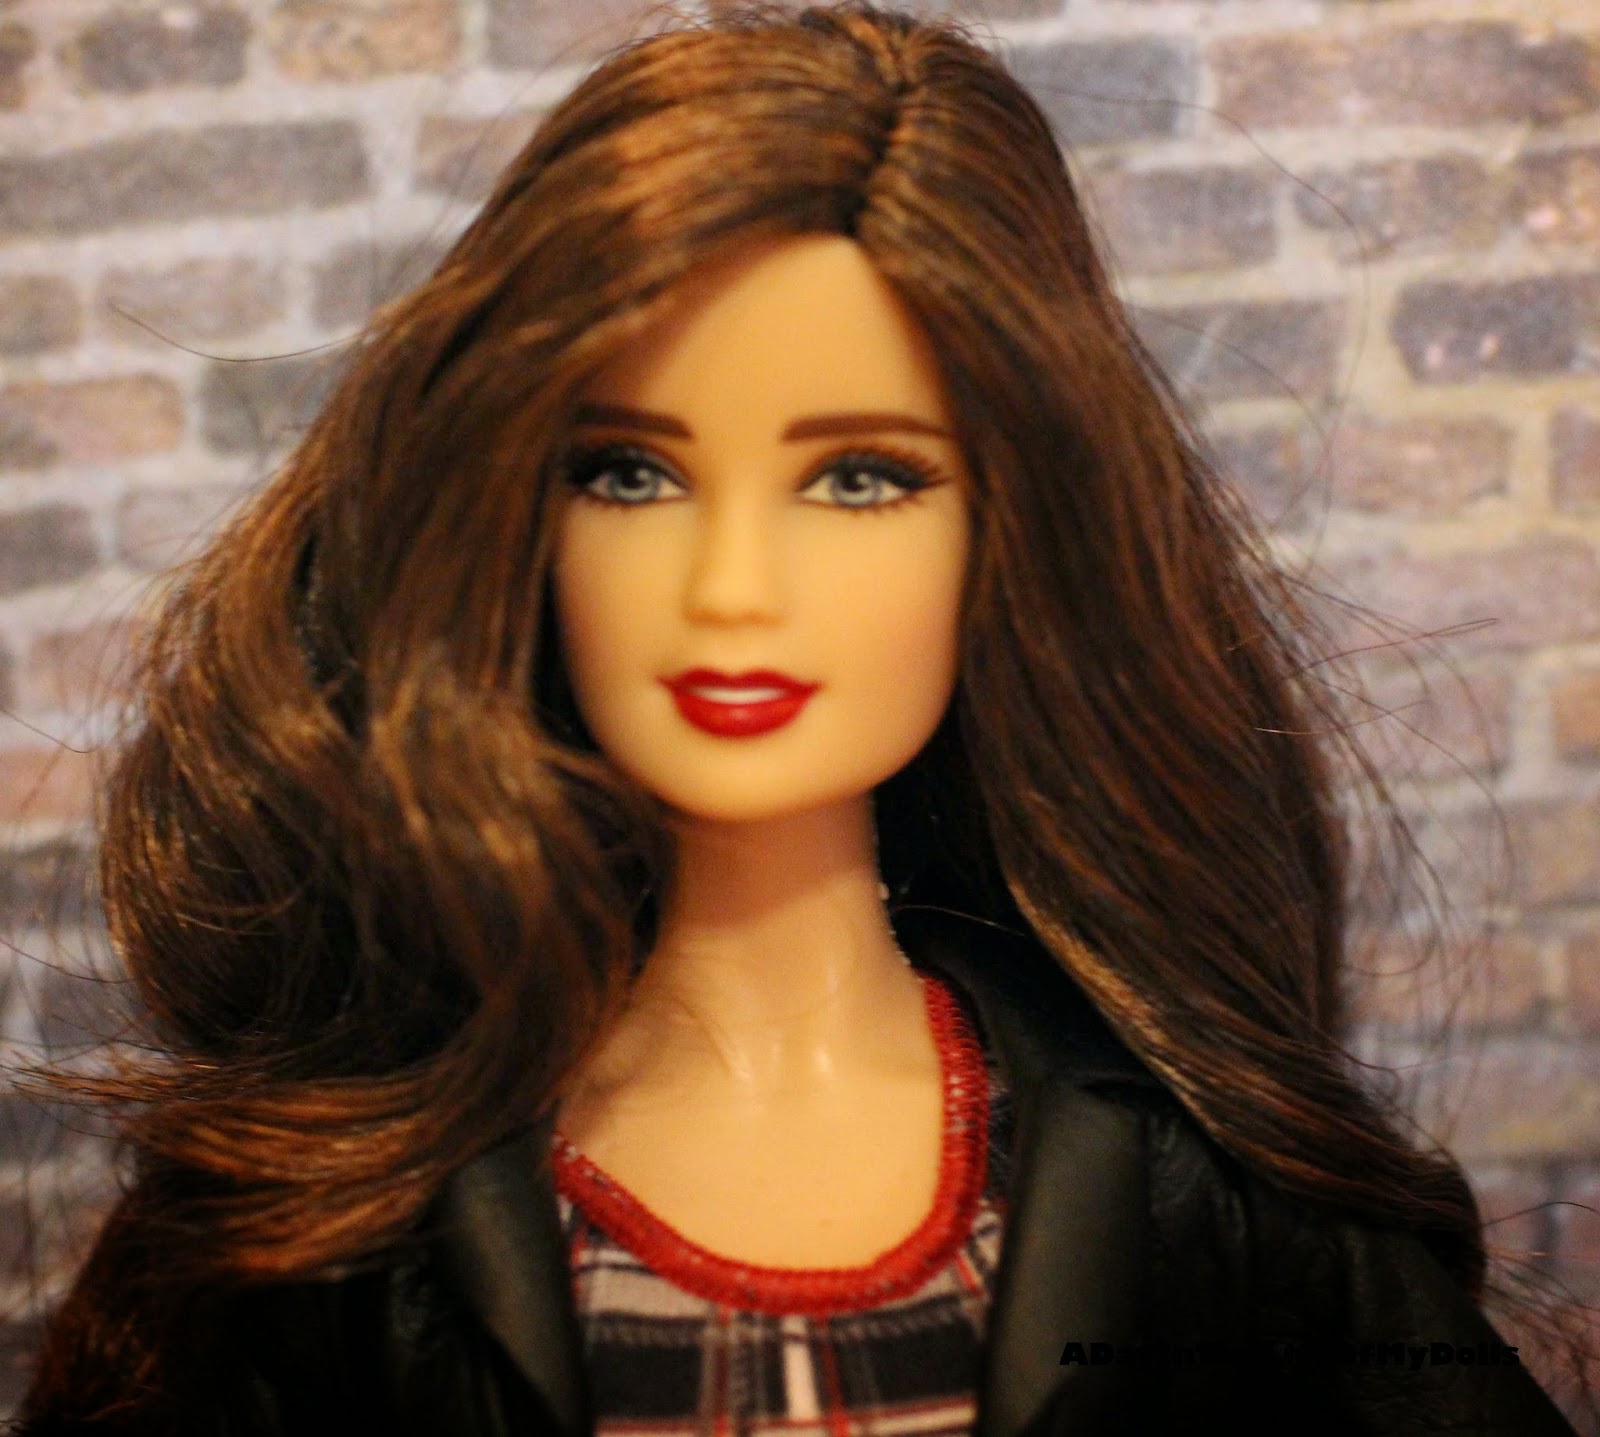 A Day In The Life Of My Dolls: Dolls, Dolls and More Dolls! (Part 1)